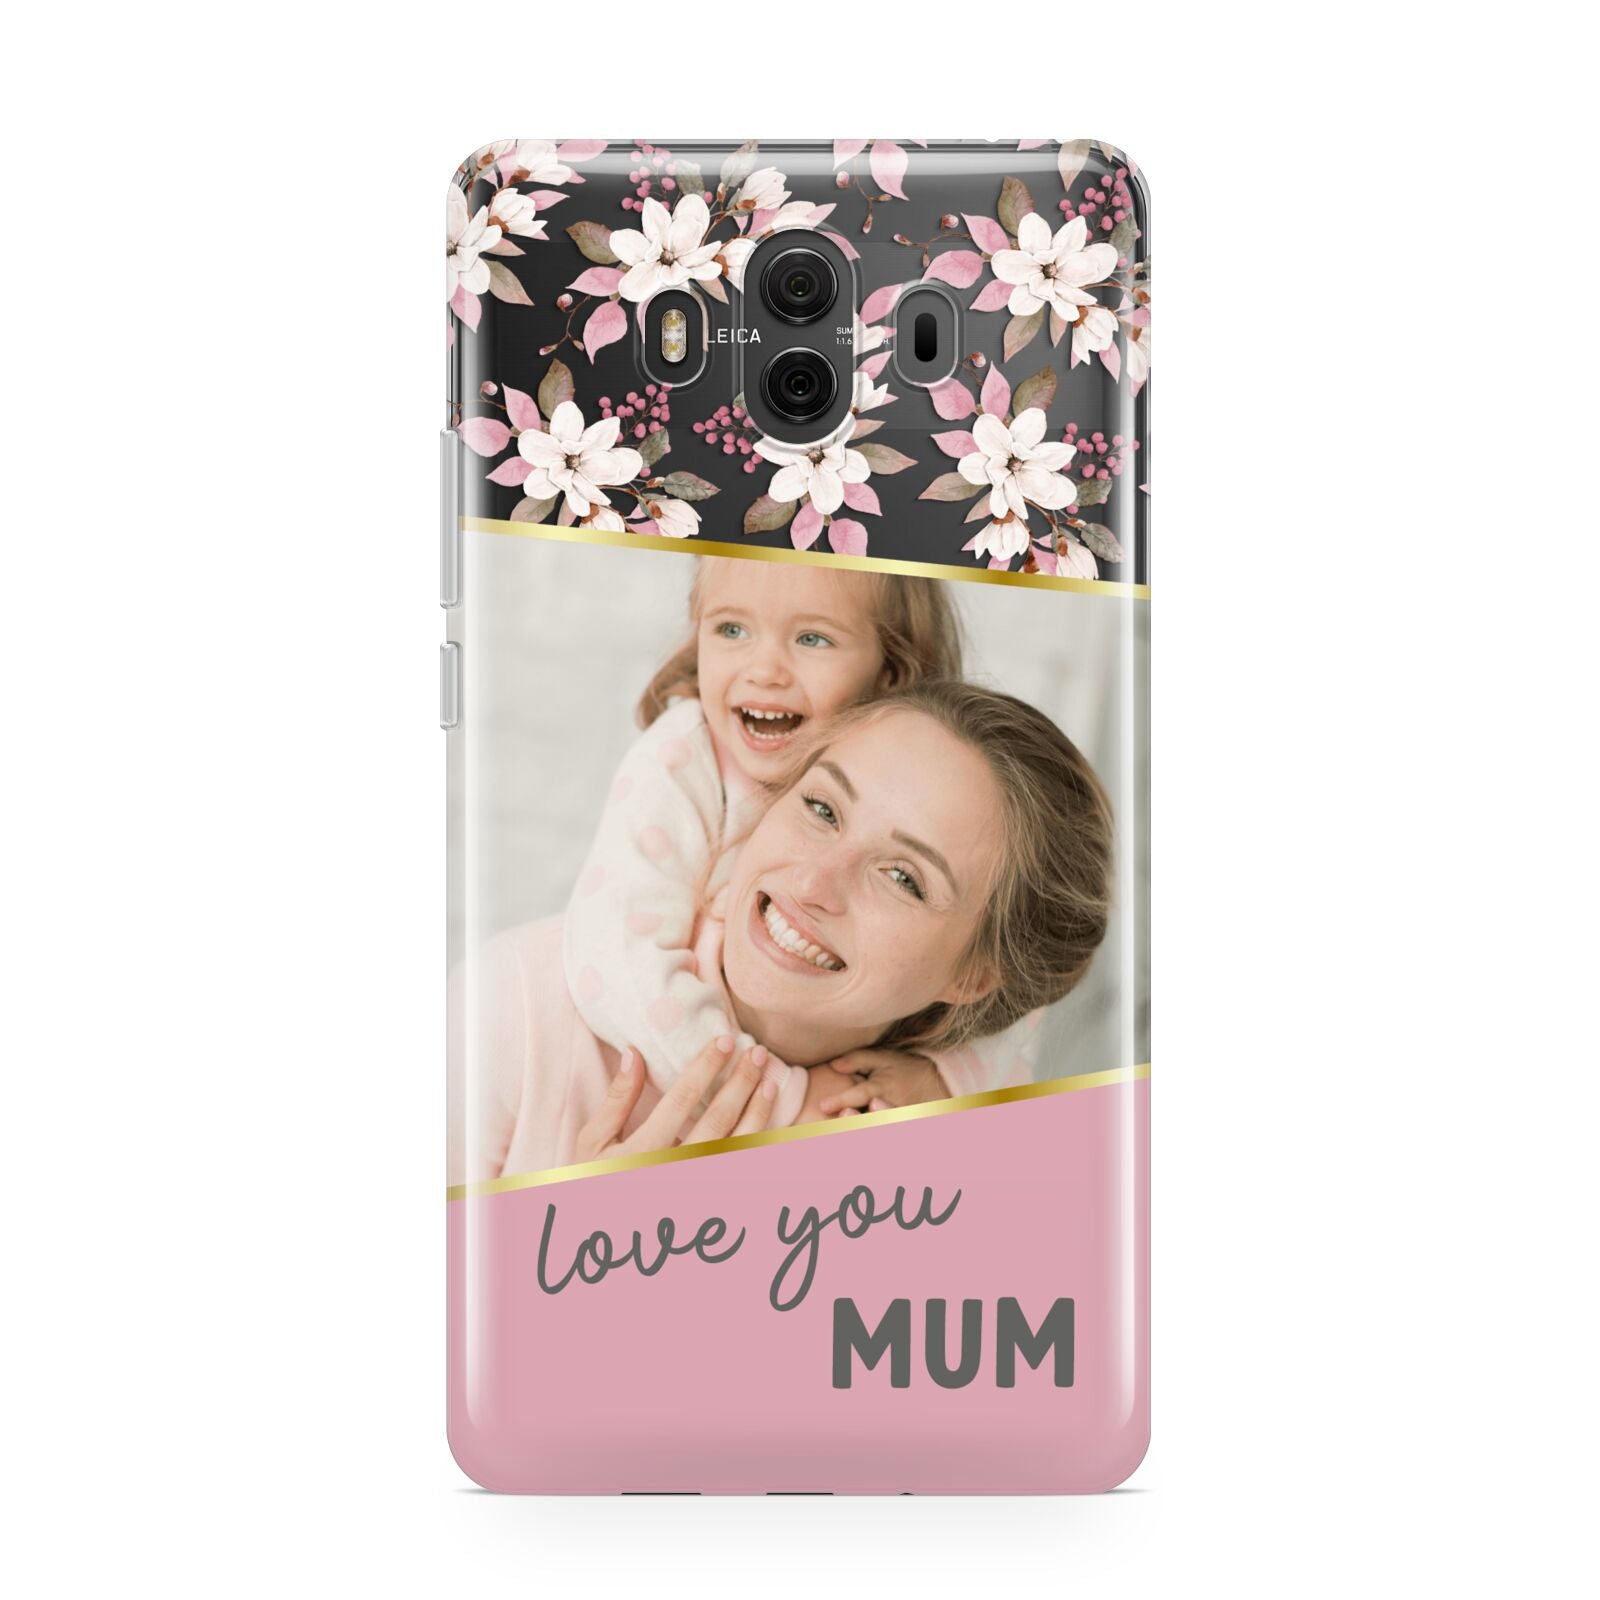 Personalised Love You Mum Huawei Mate 10 Protective Phone Case